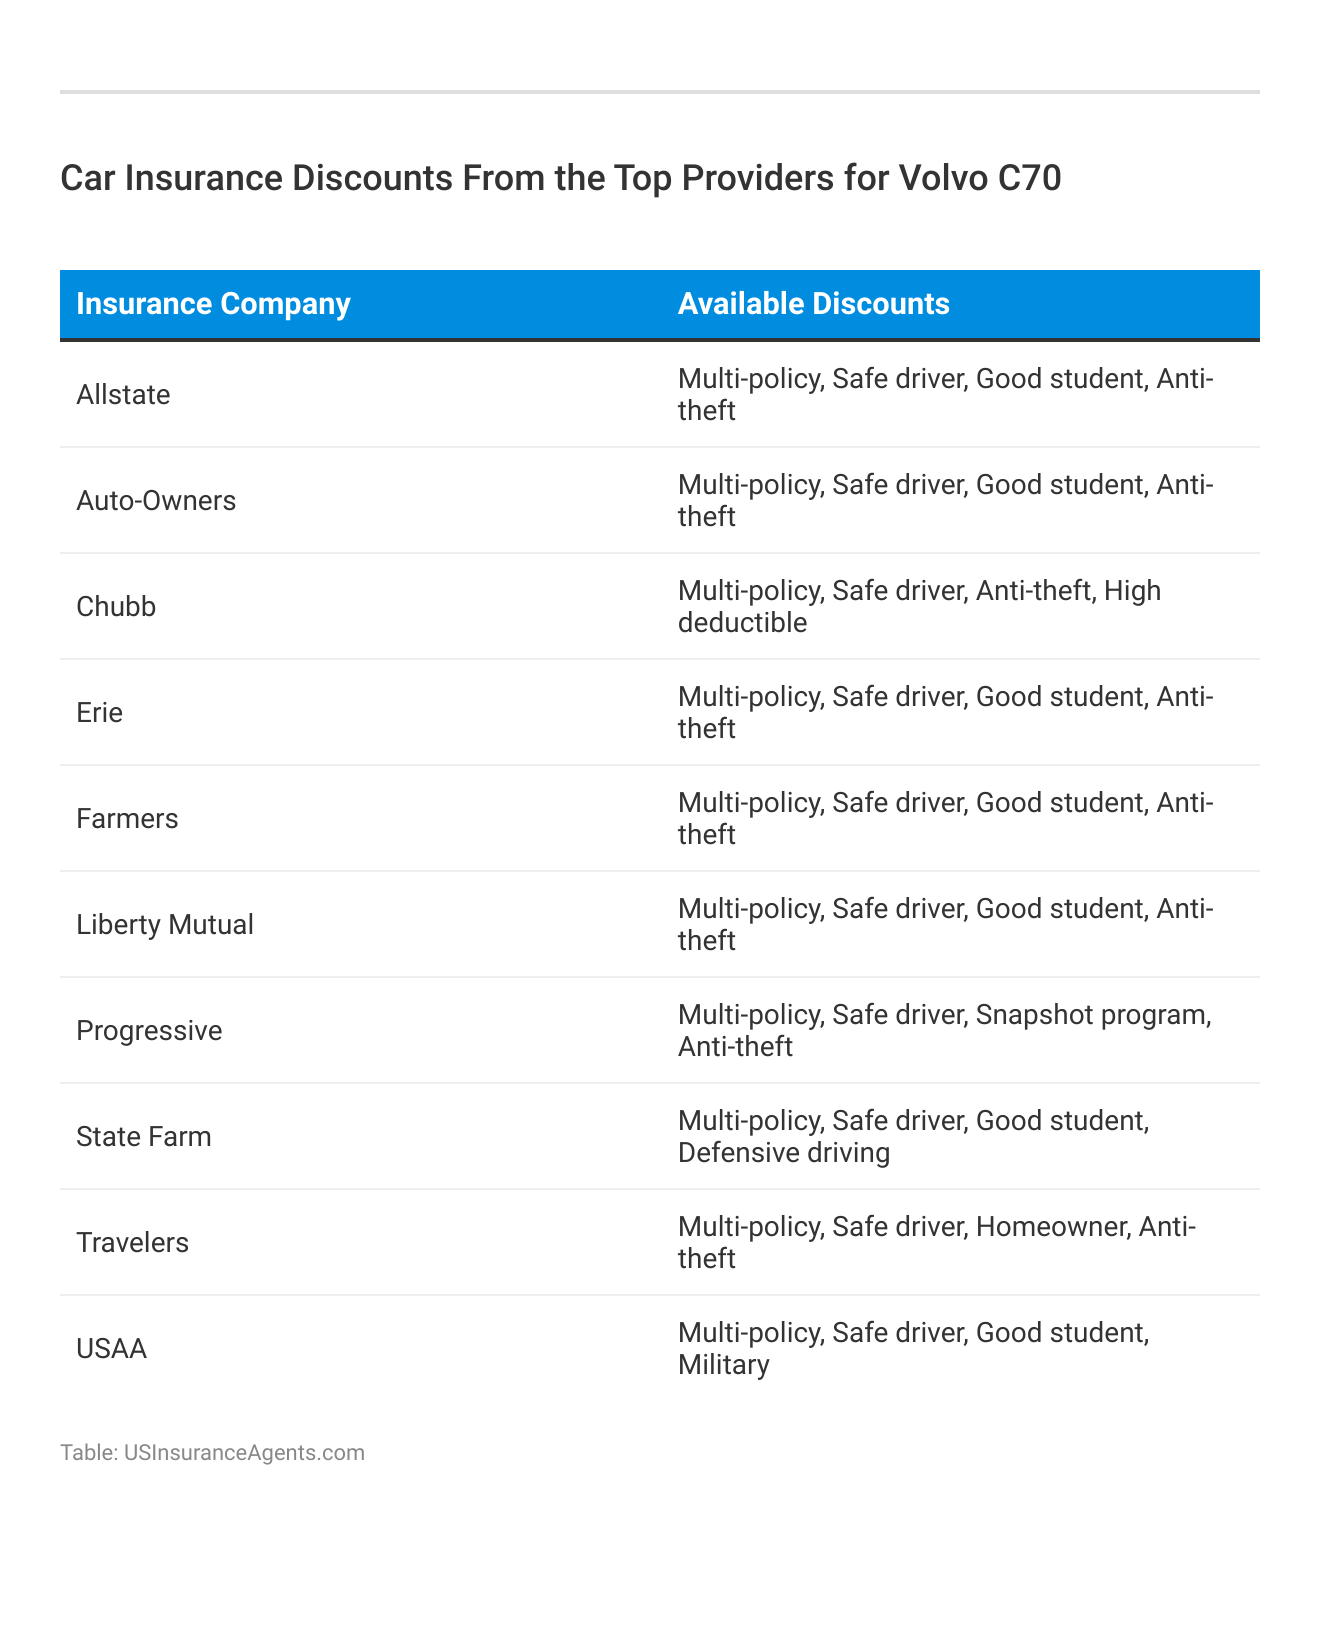 <h3>Car Insurance Discounts From the Top Providers for Volvo C70</h3>